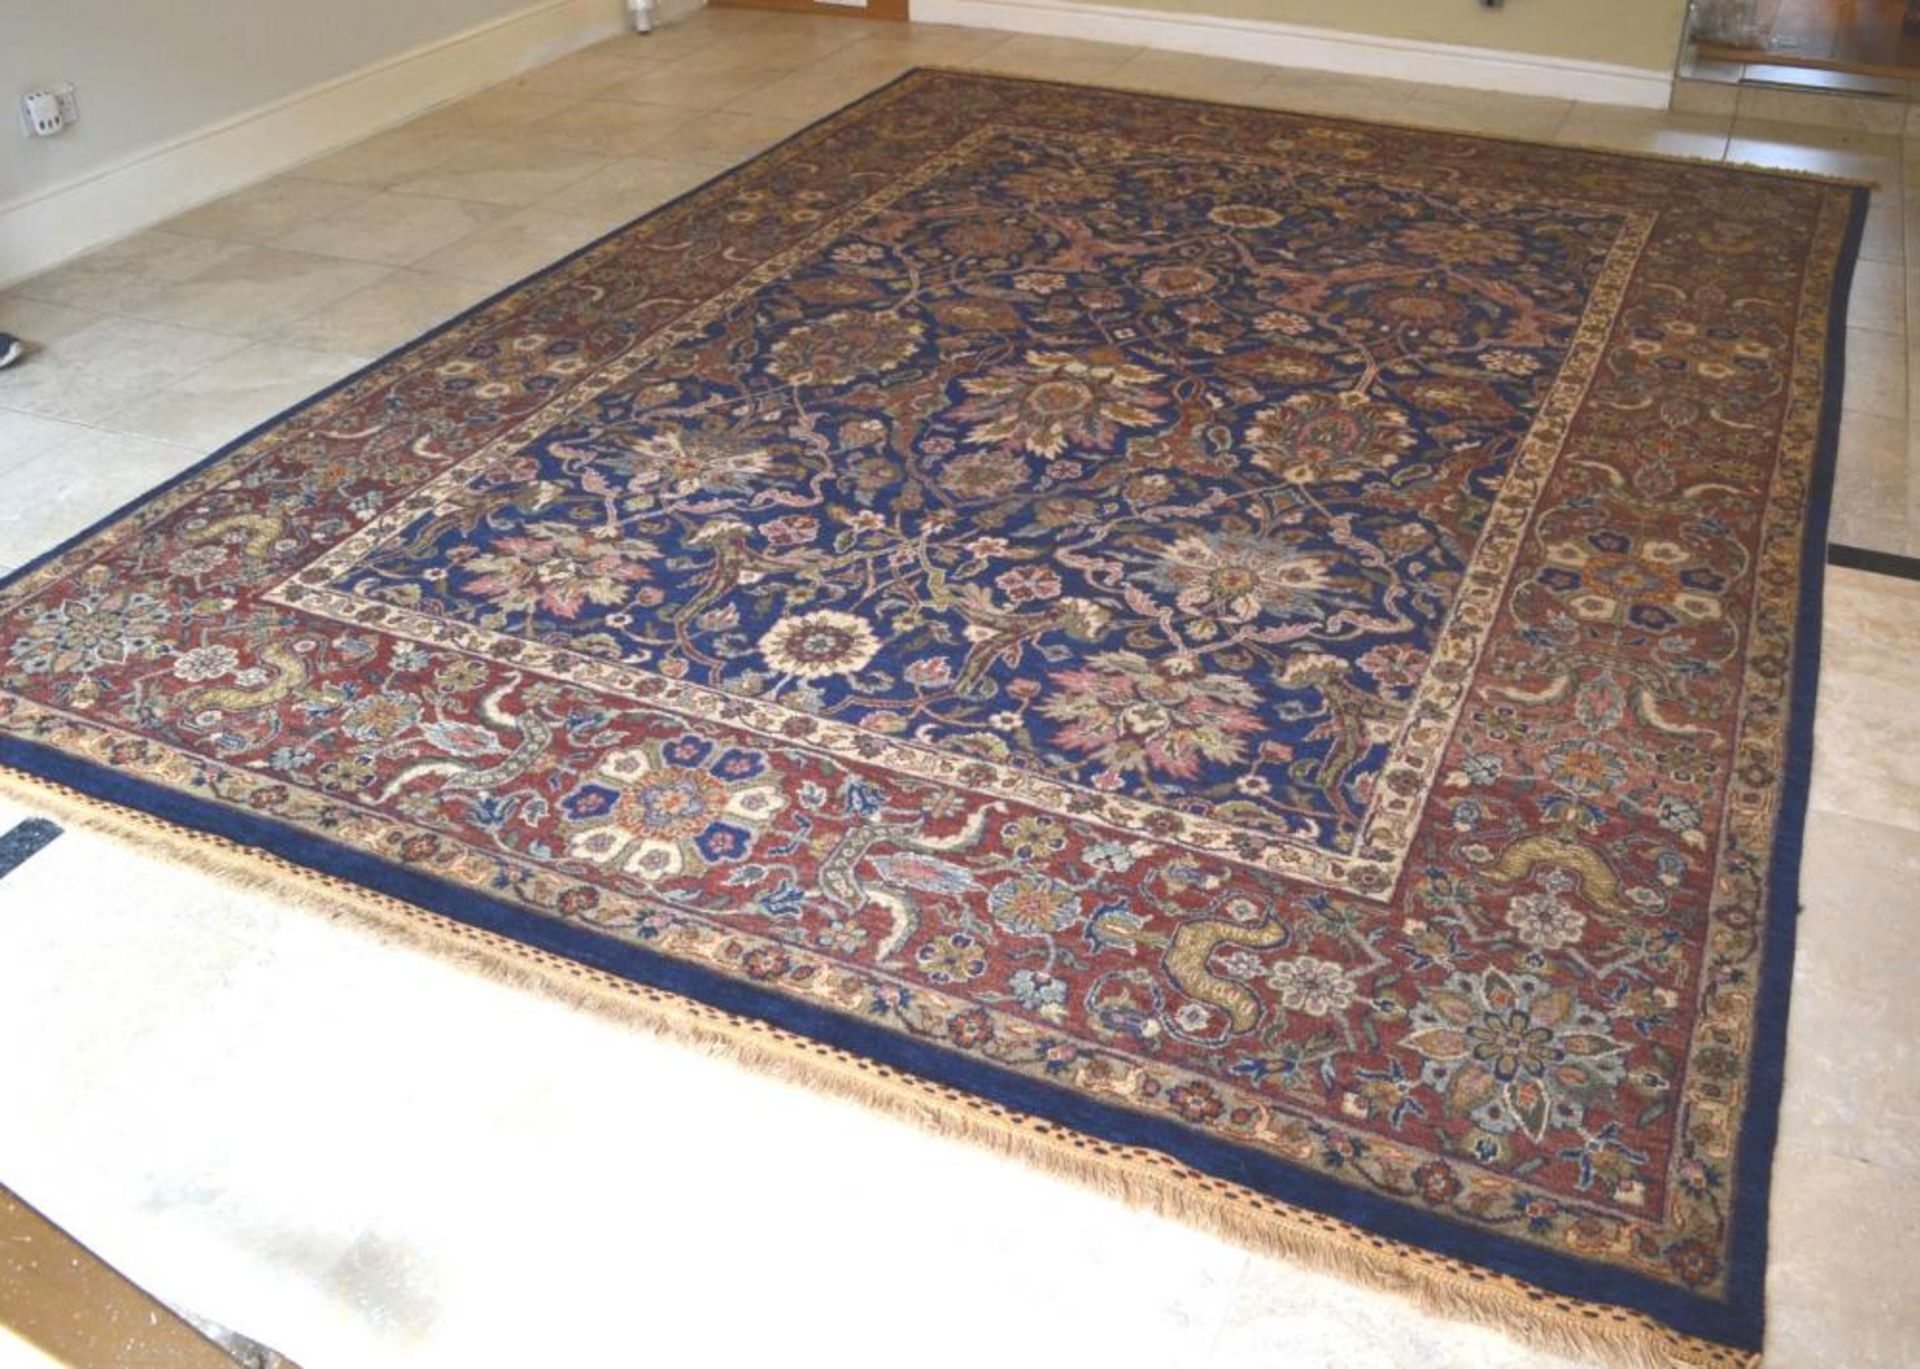 1 x Fine Indian Vegetable Dyed Handmade Carpet in Navy and Rust - All Wool With Cotton Foundation - - Image 12 of 22